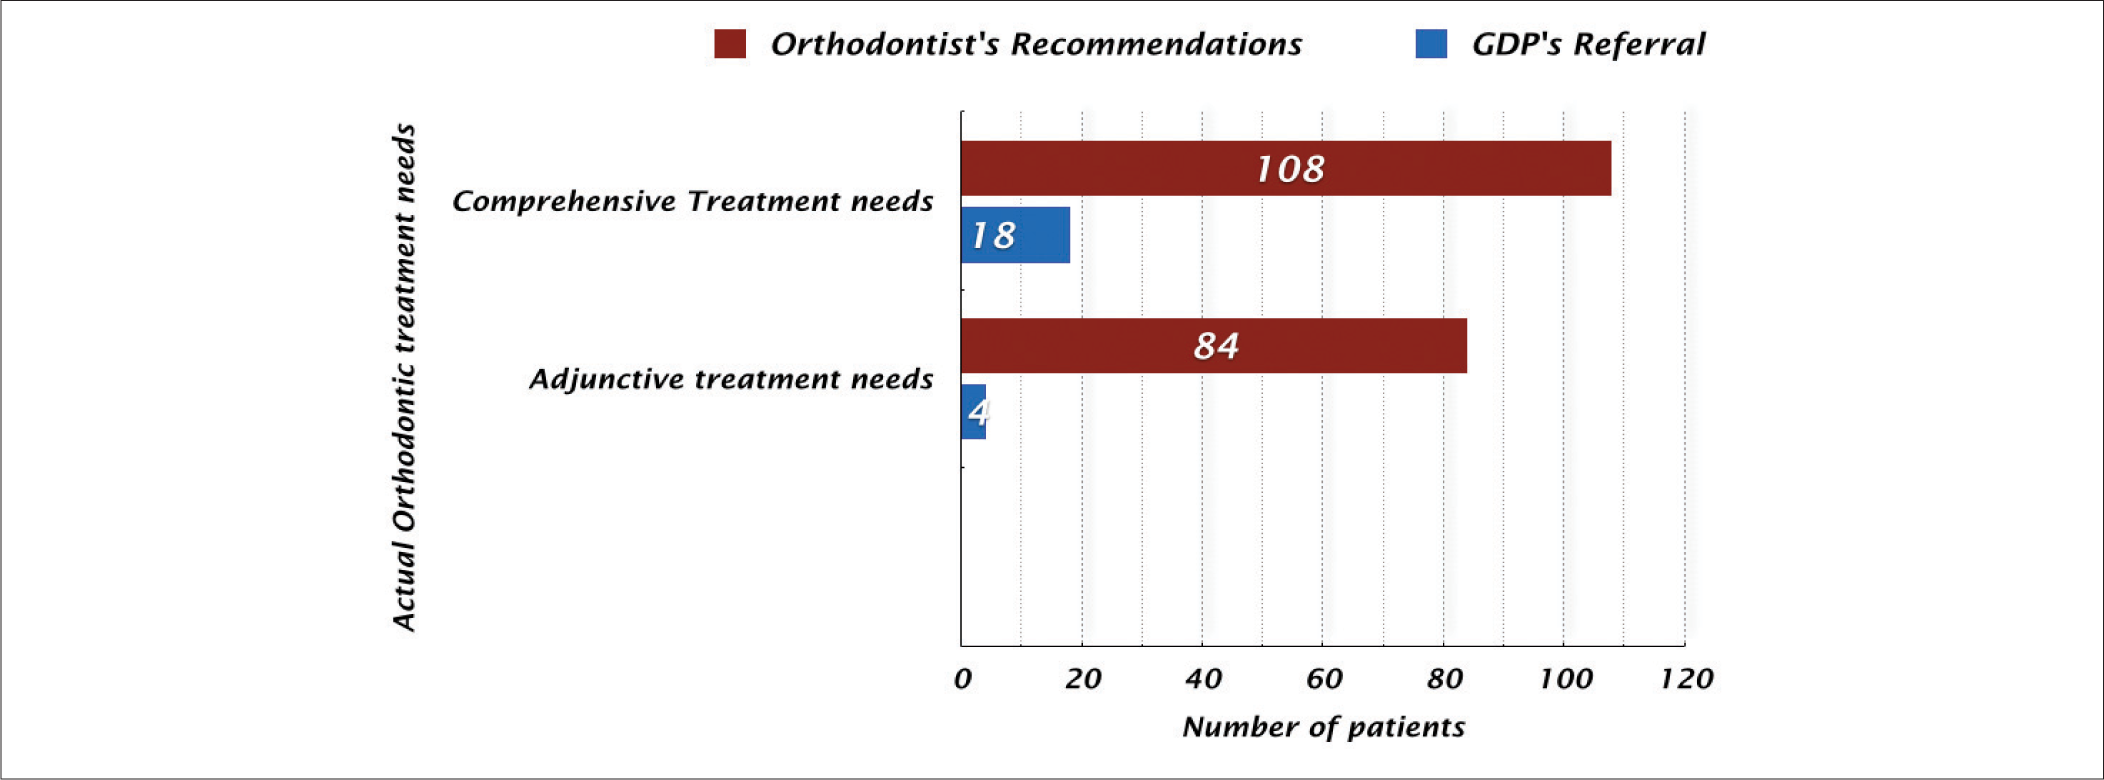 Comparing patient’s actually needing orthodontics as per orthodontists recommendation, with treatment recommendations made by general dentists. (Only 16.67% patients [18 patients out of 108] needing comprehensive orthodontics were actually referred for treatment by the general dentists. Only 4.76% patients [4 patients out of 84] needing adjunctive orthodontics were actually referred for treatment by the general dentists)